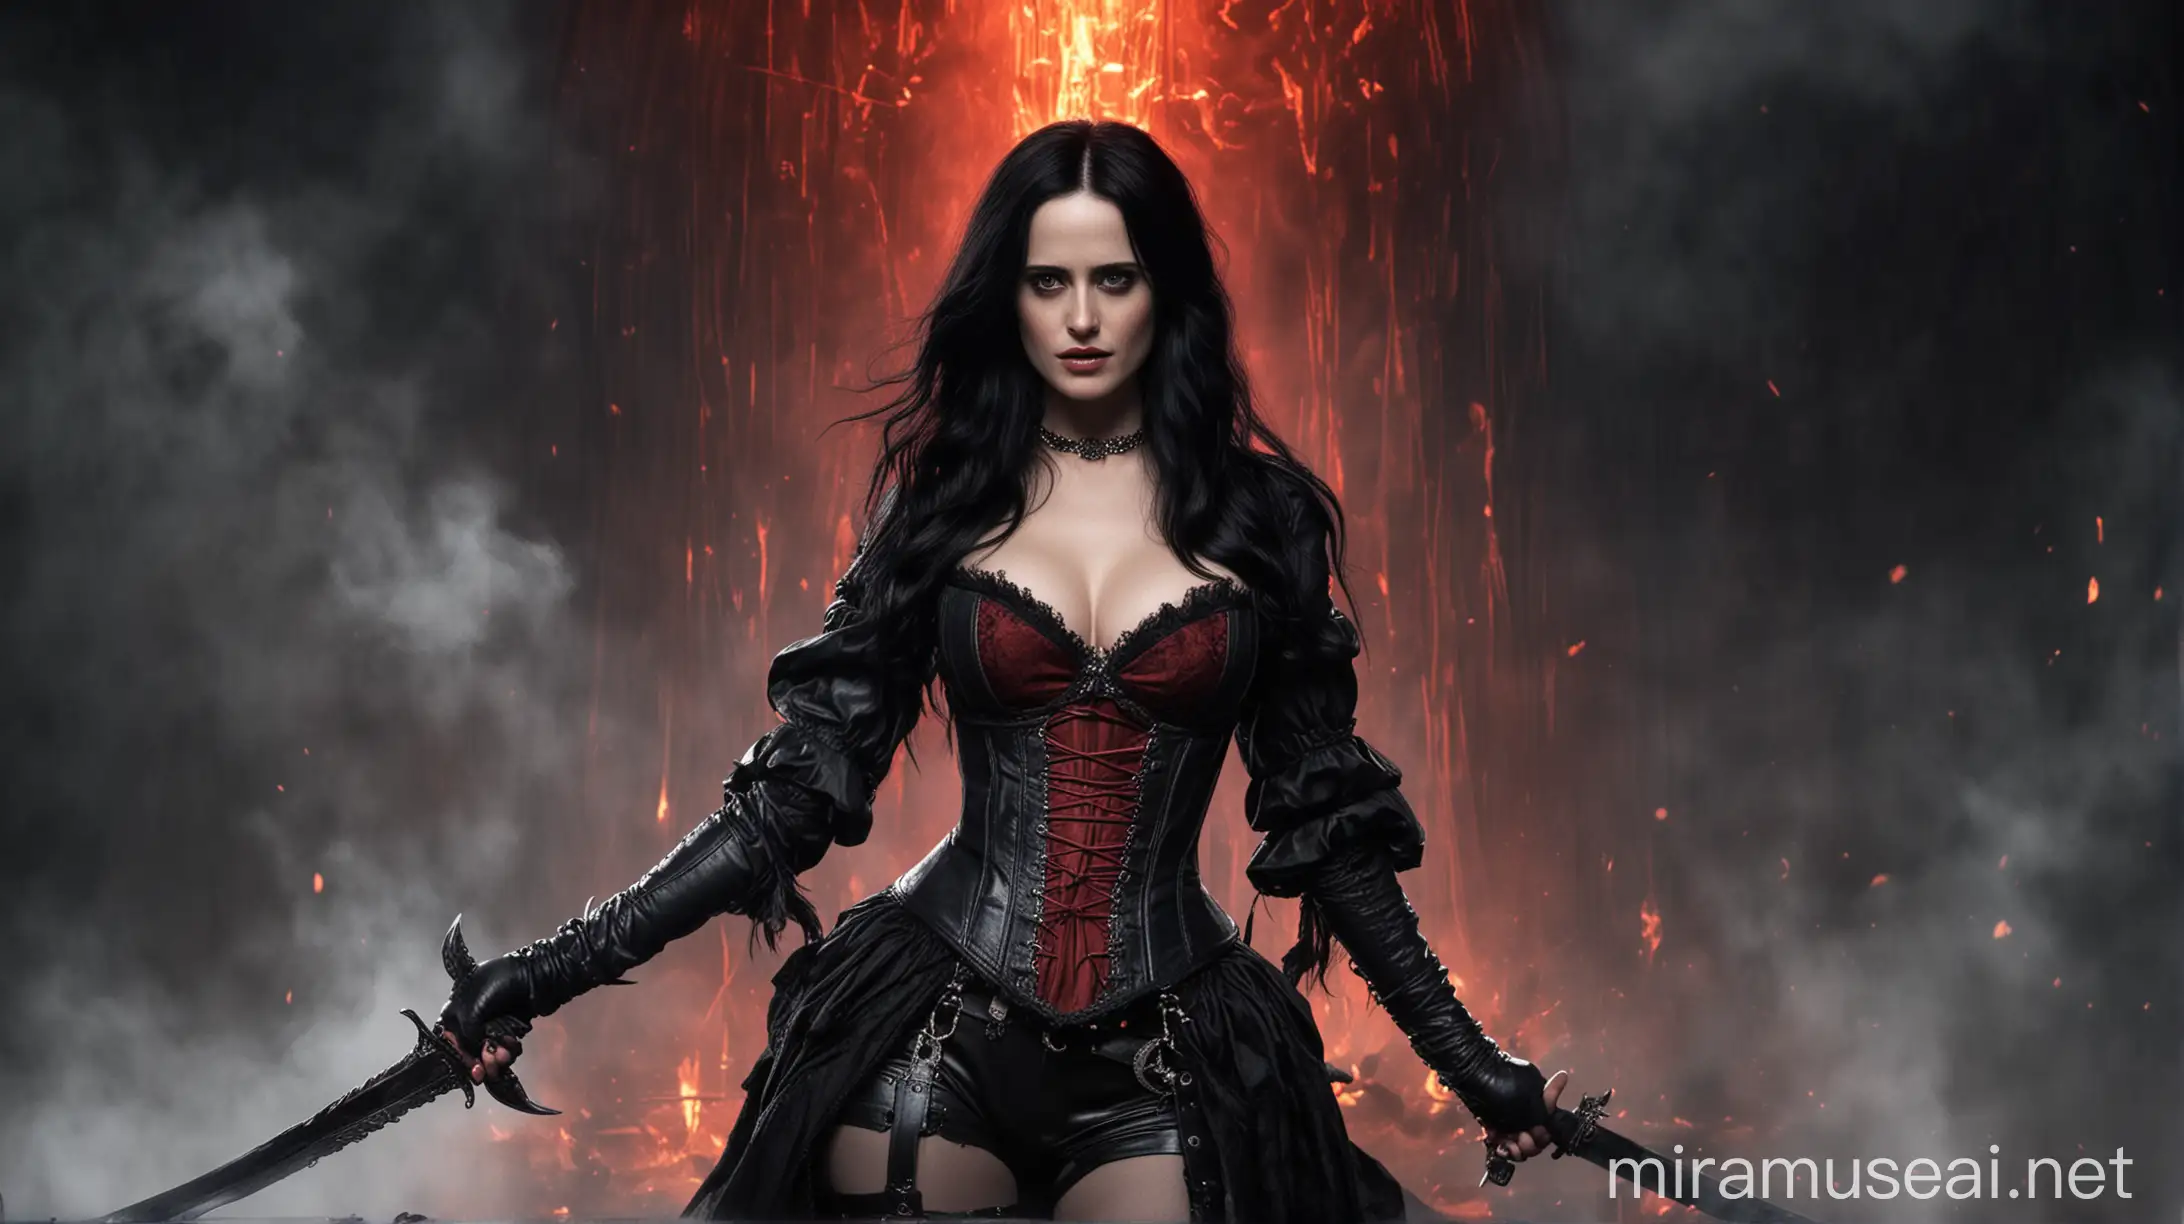 Eva Green Portrays Enigmatic Yennefer of Vengerberg in Seductive Red Corset Amidst Mystical Ambiance